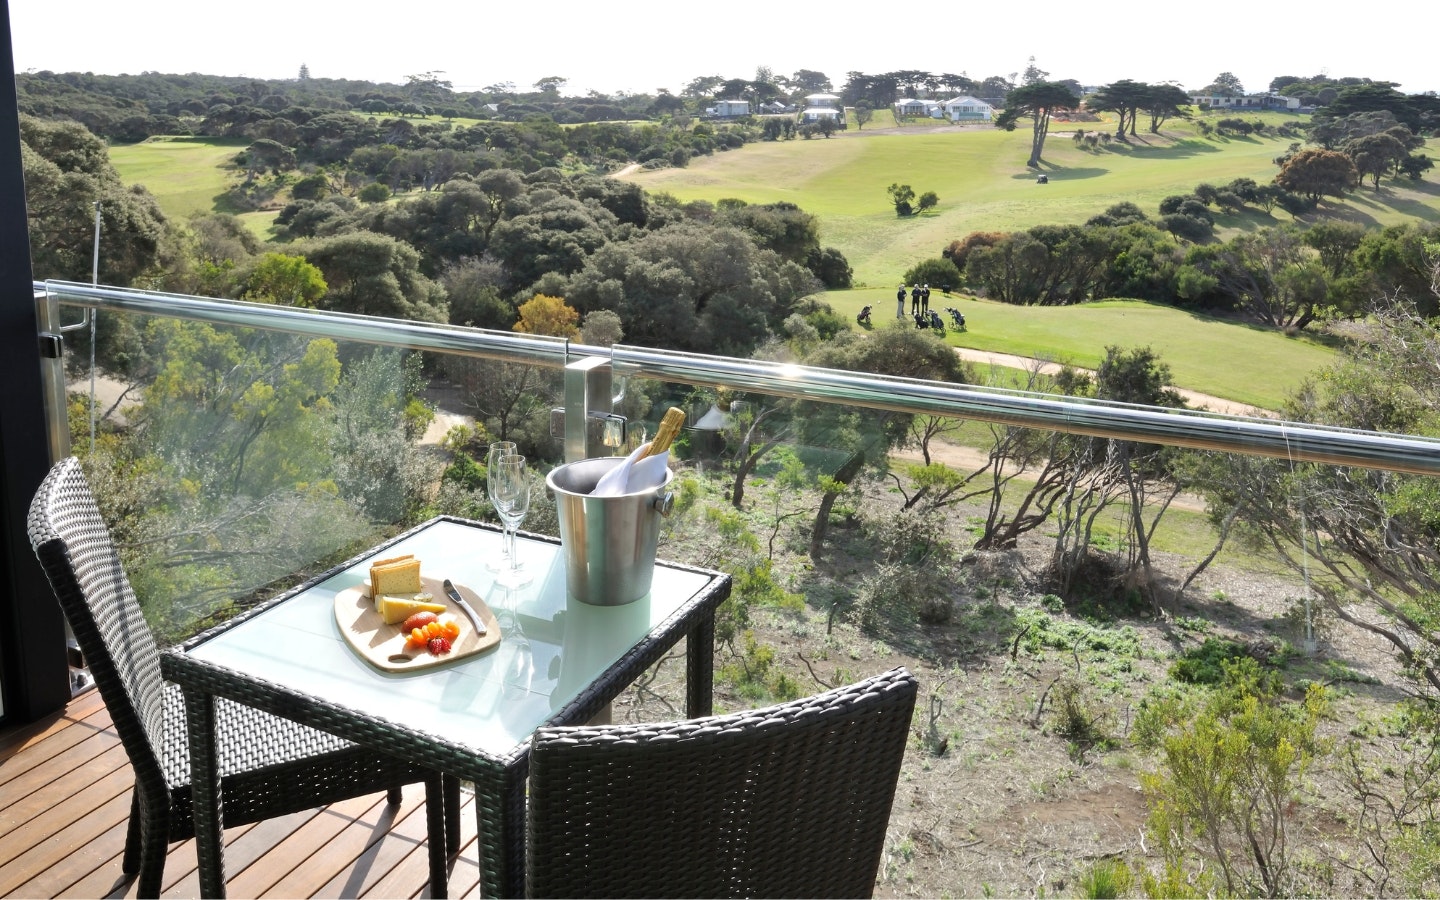 A table on a balcony looking at the view of a golf course